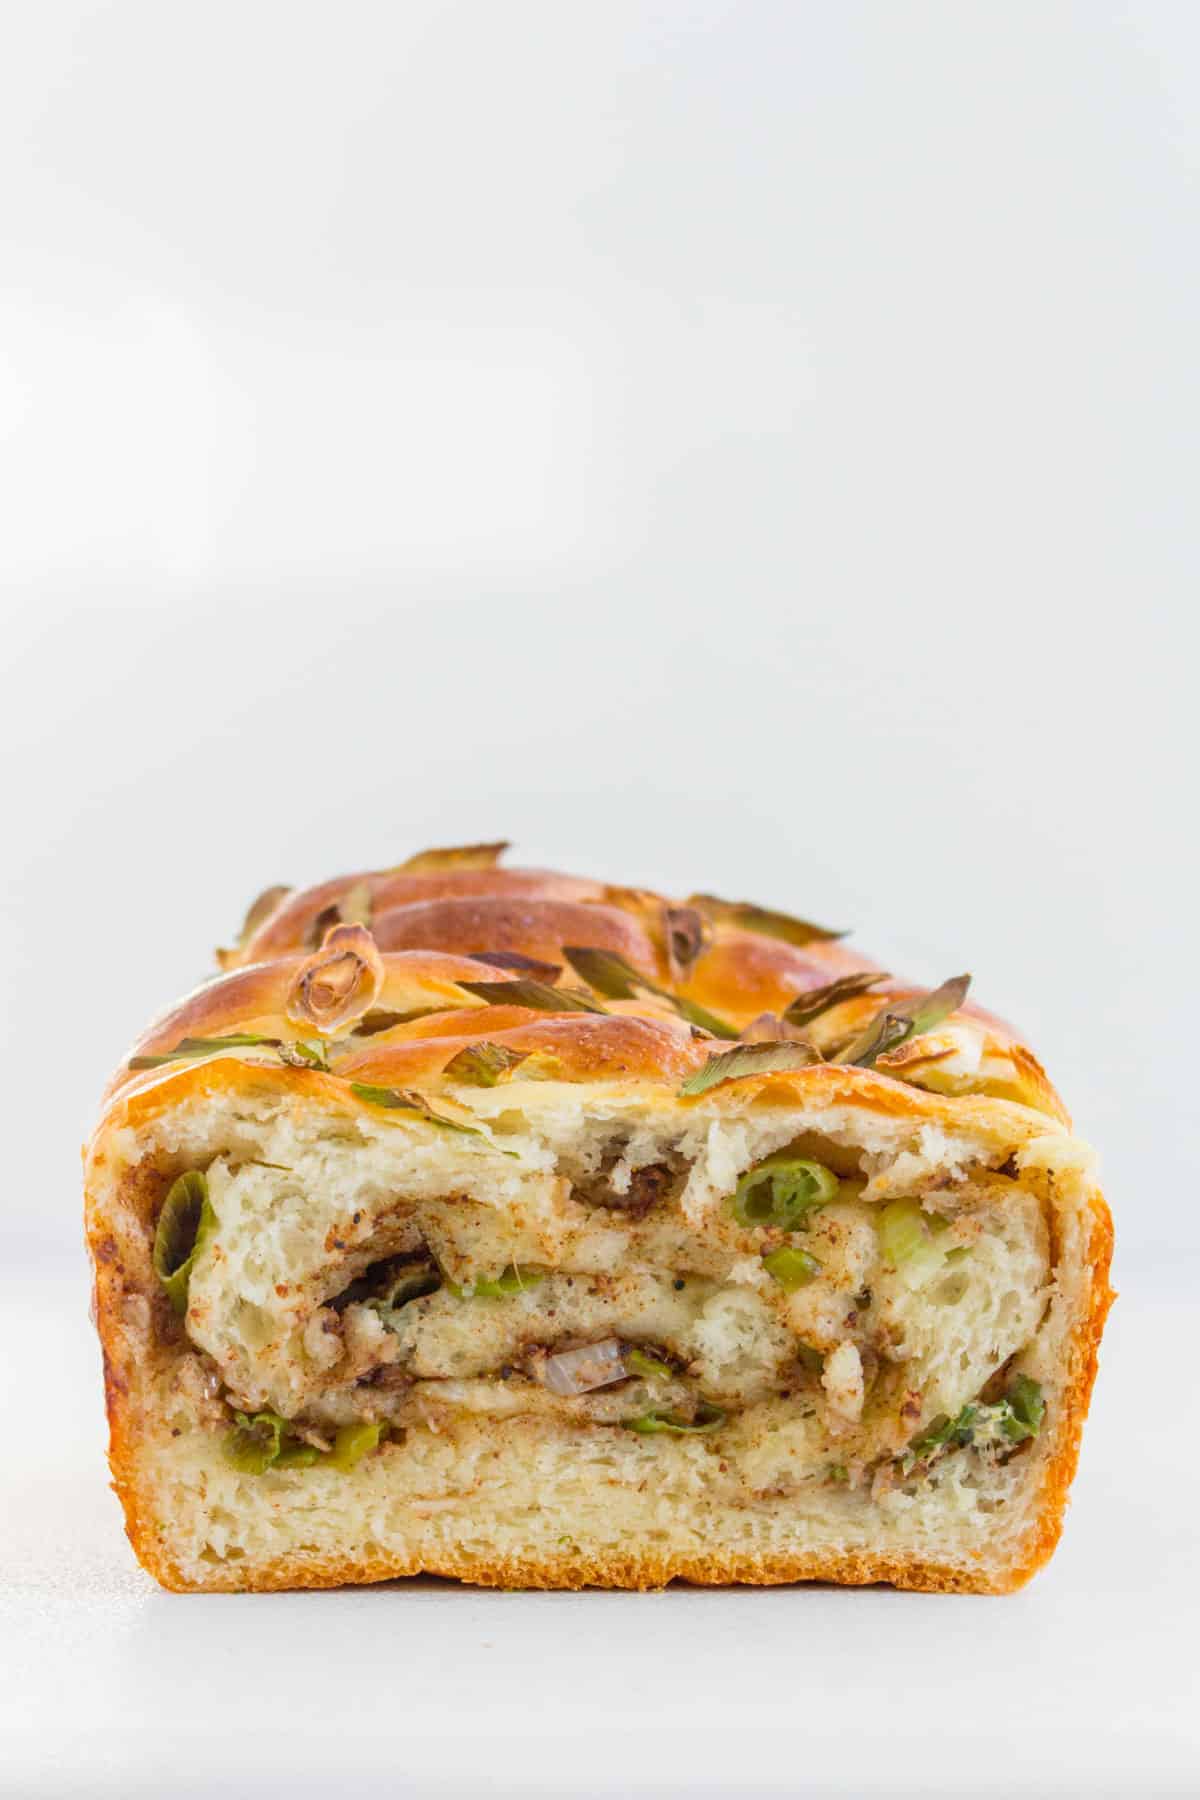 The inside of the scallion milk bread showing the swirls.